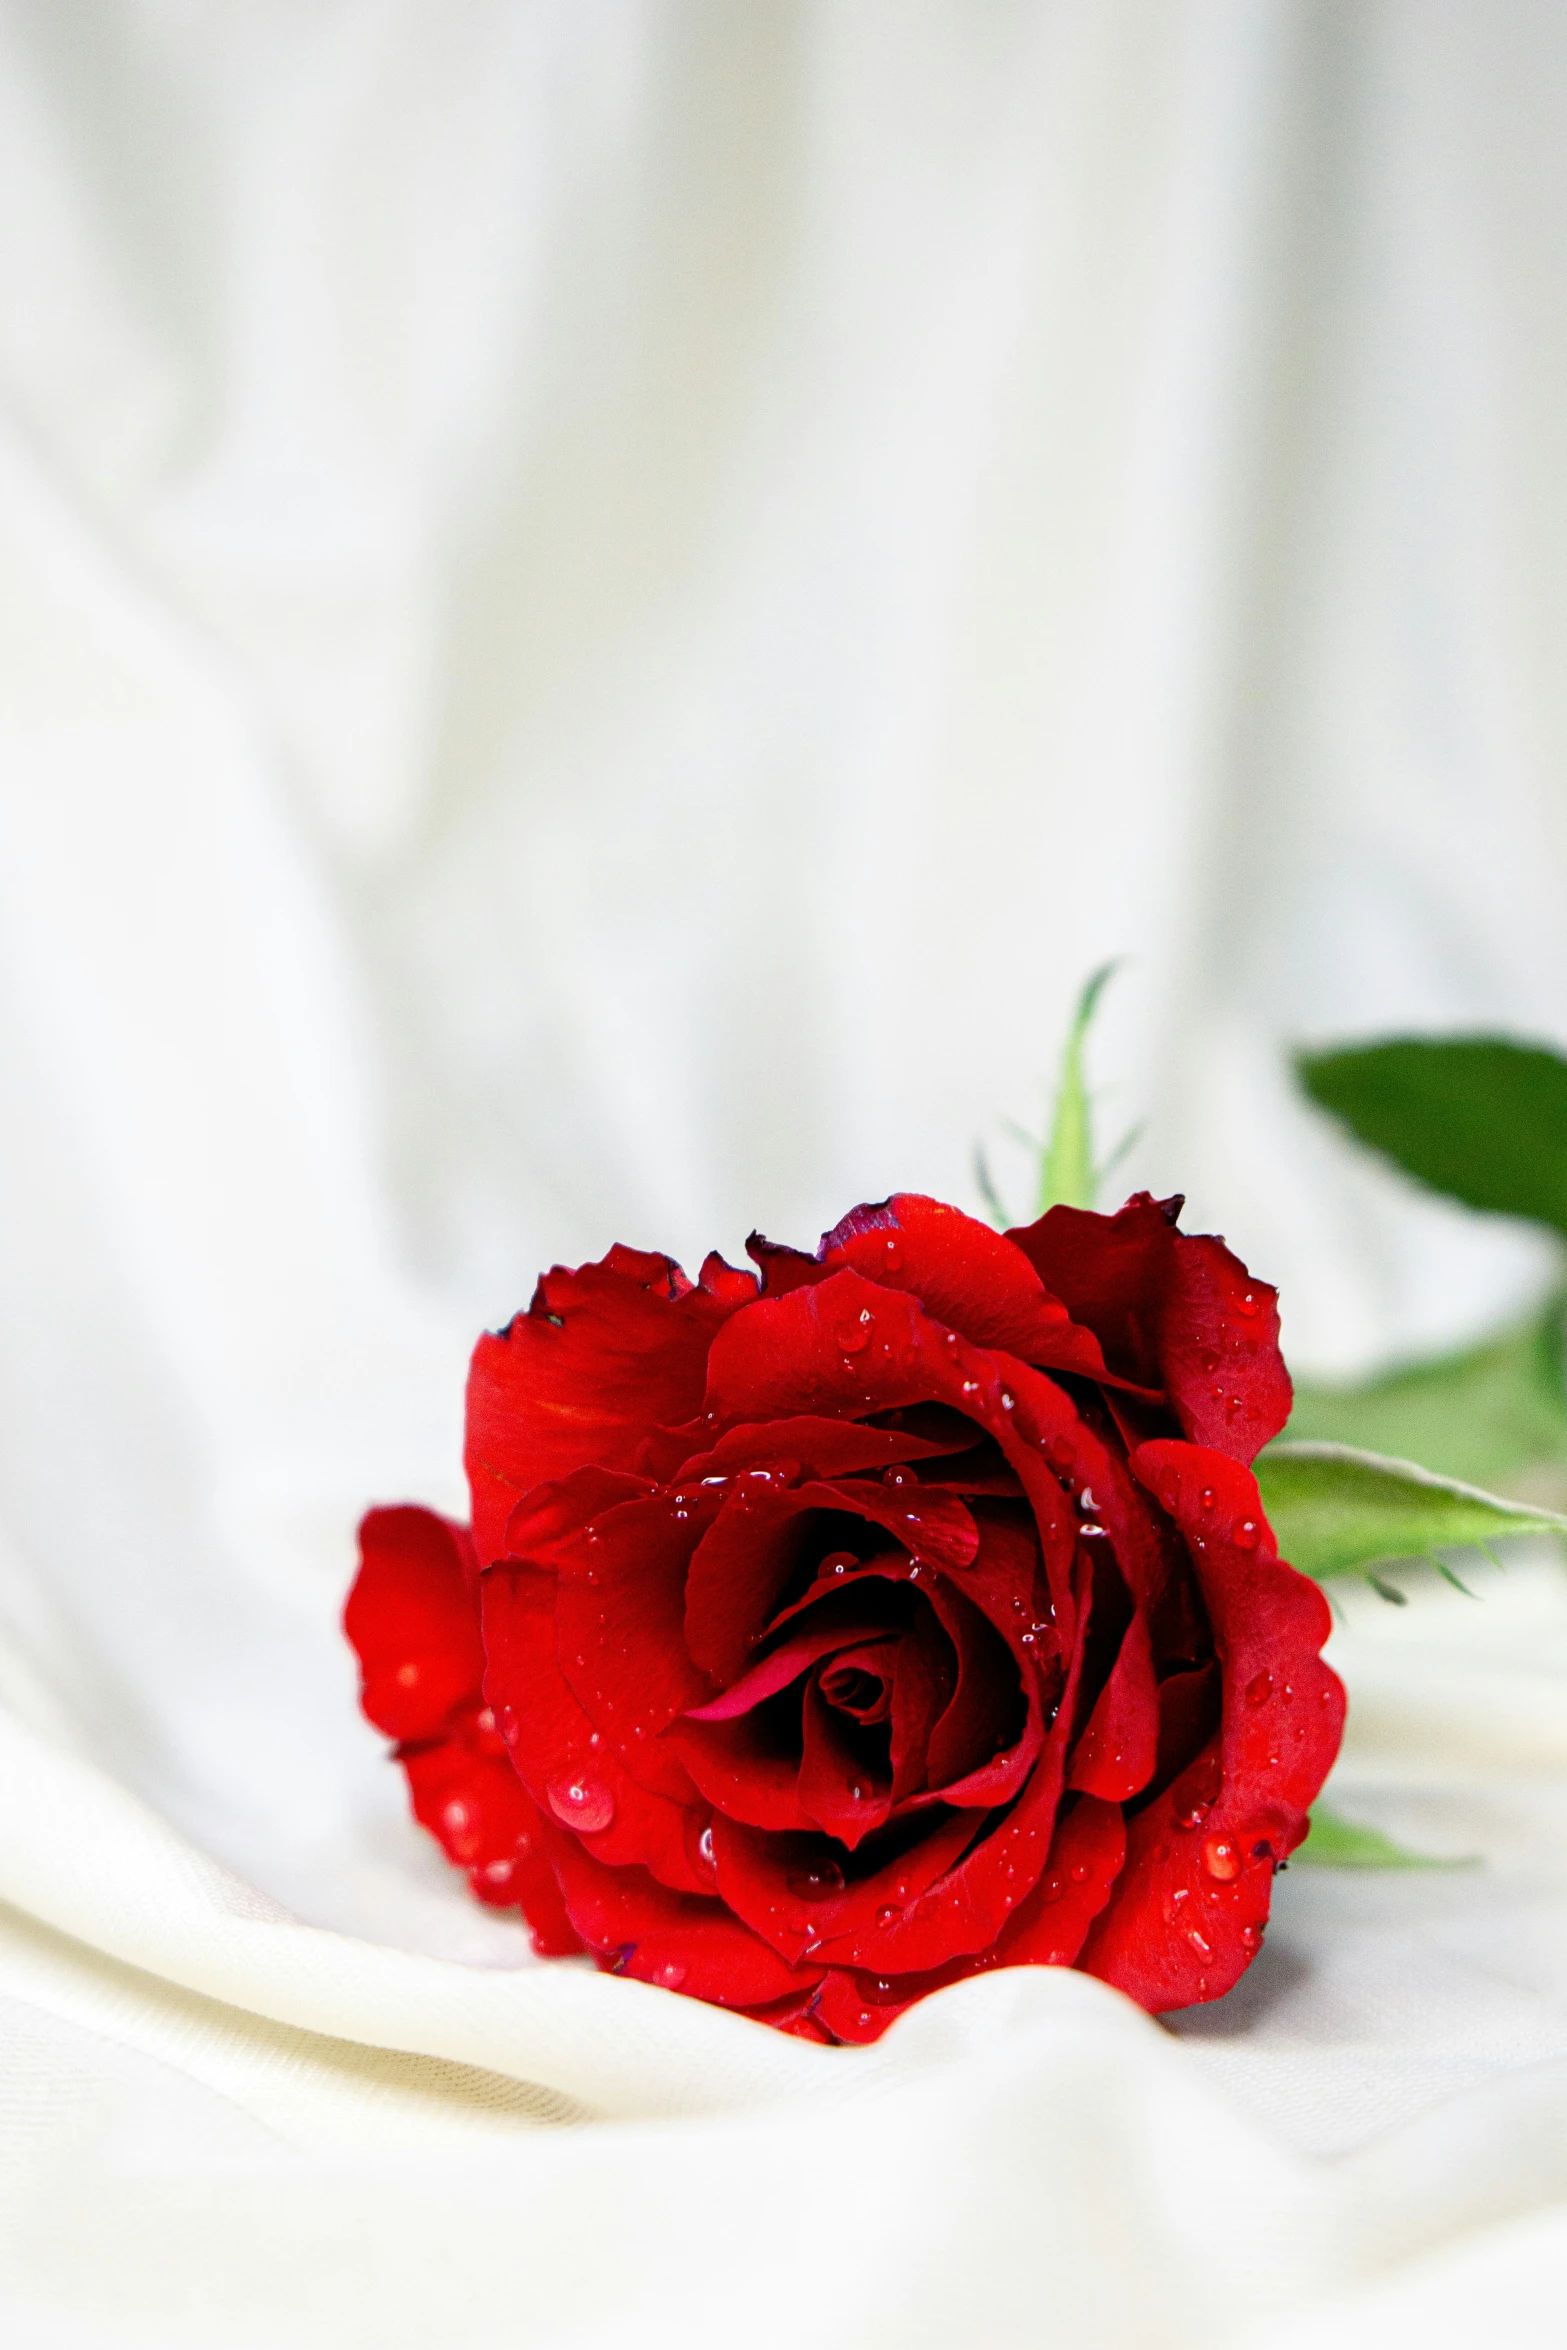 the rose is covered in dewy water and sits on the cloth